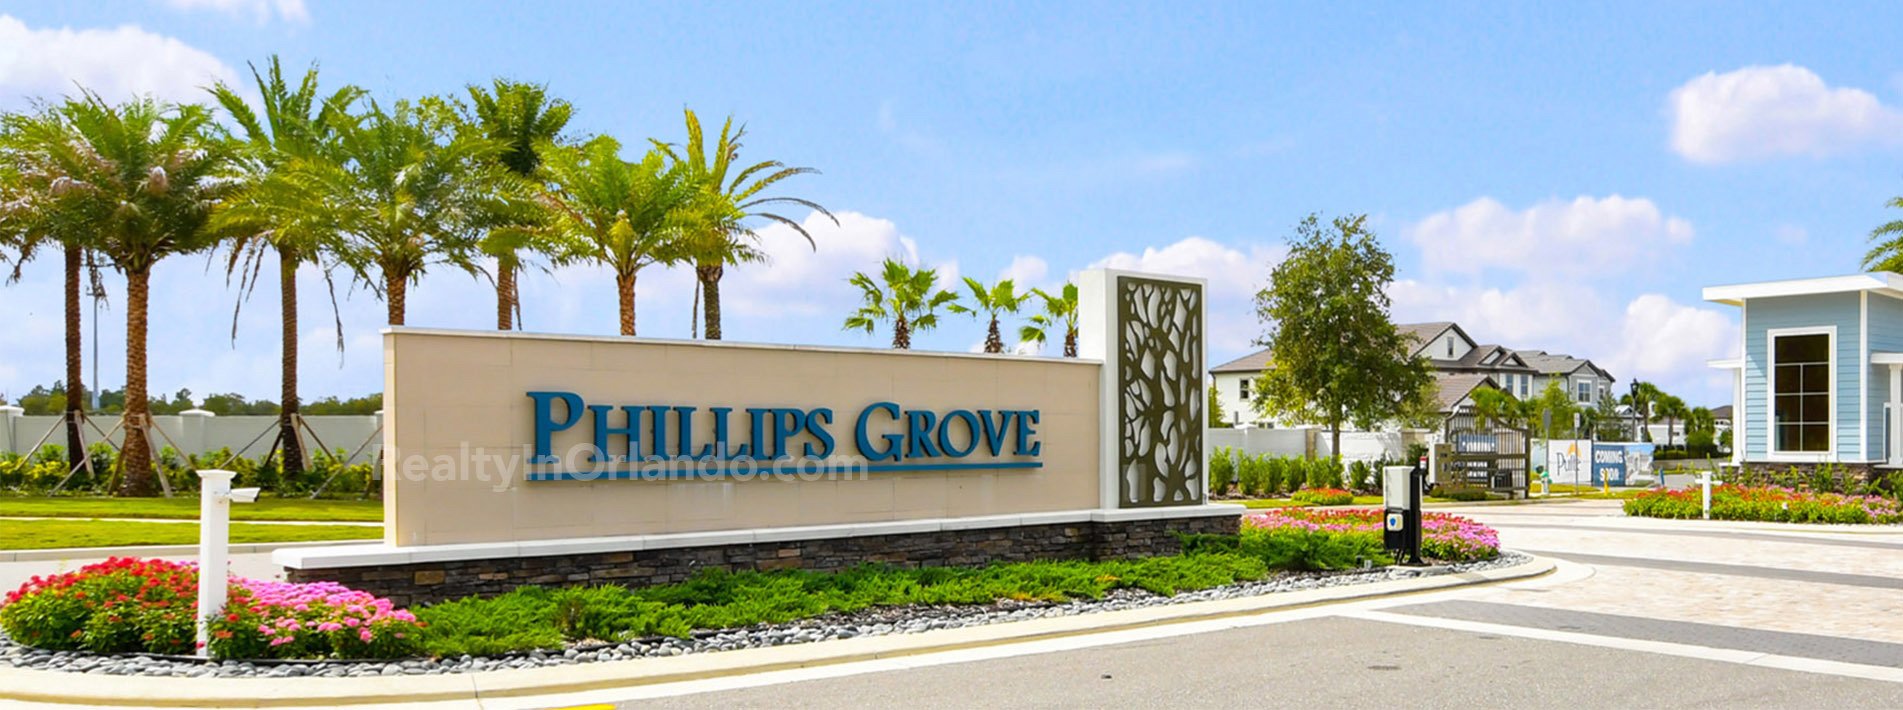 Phillips Grove Homes for Sale